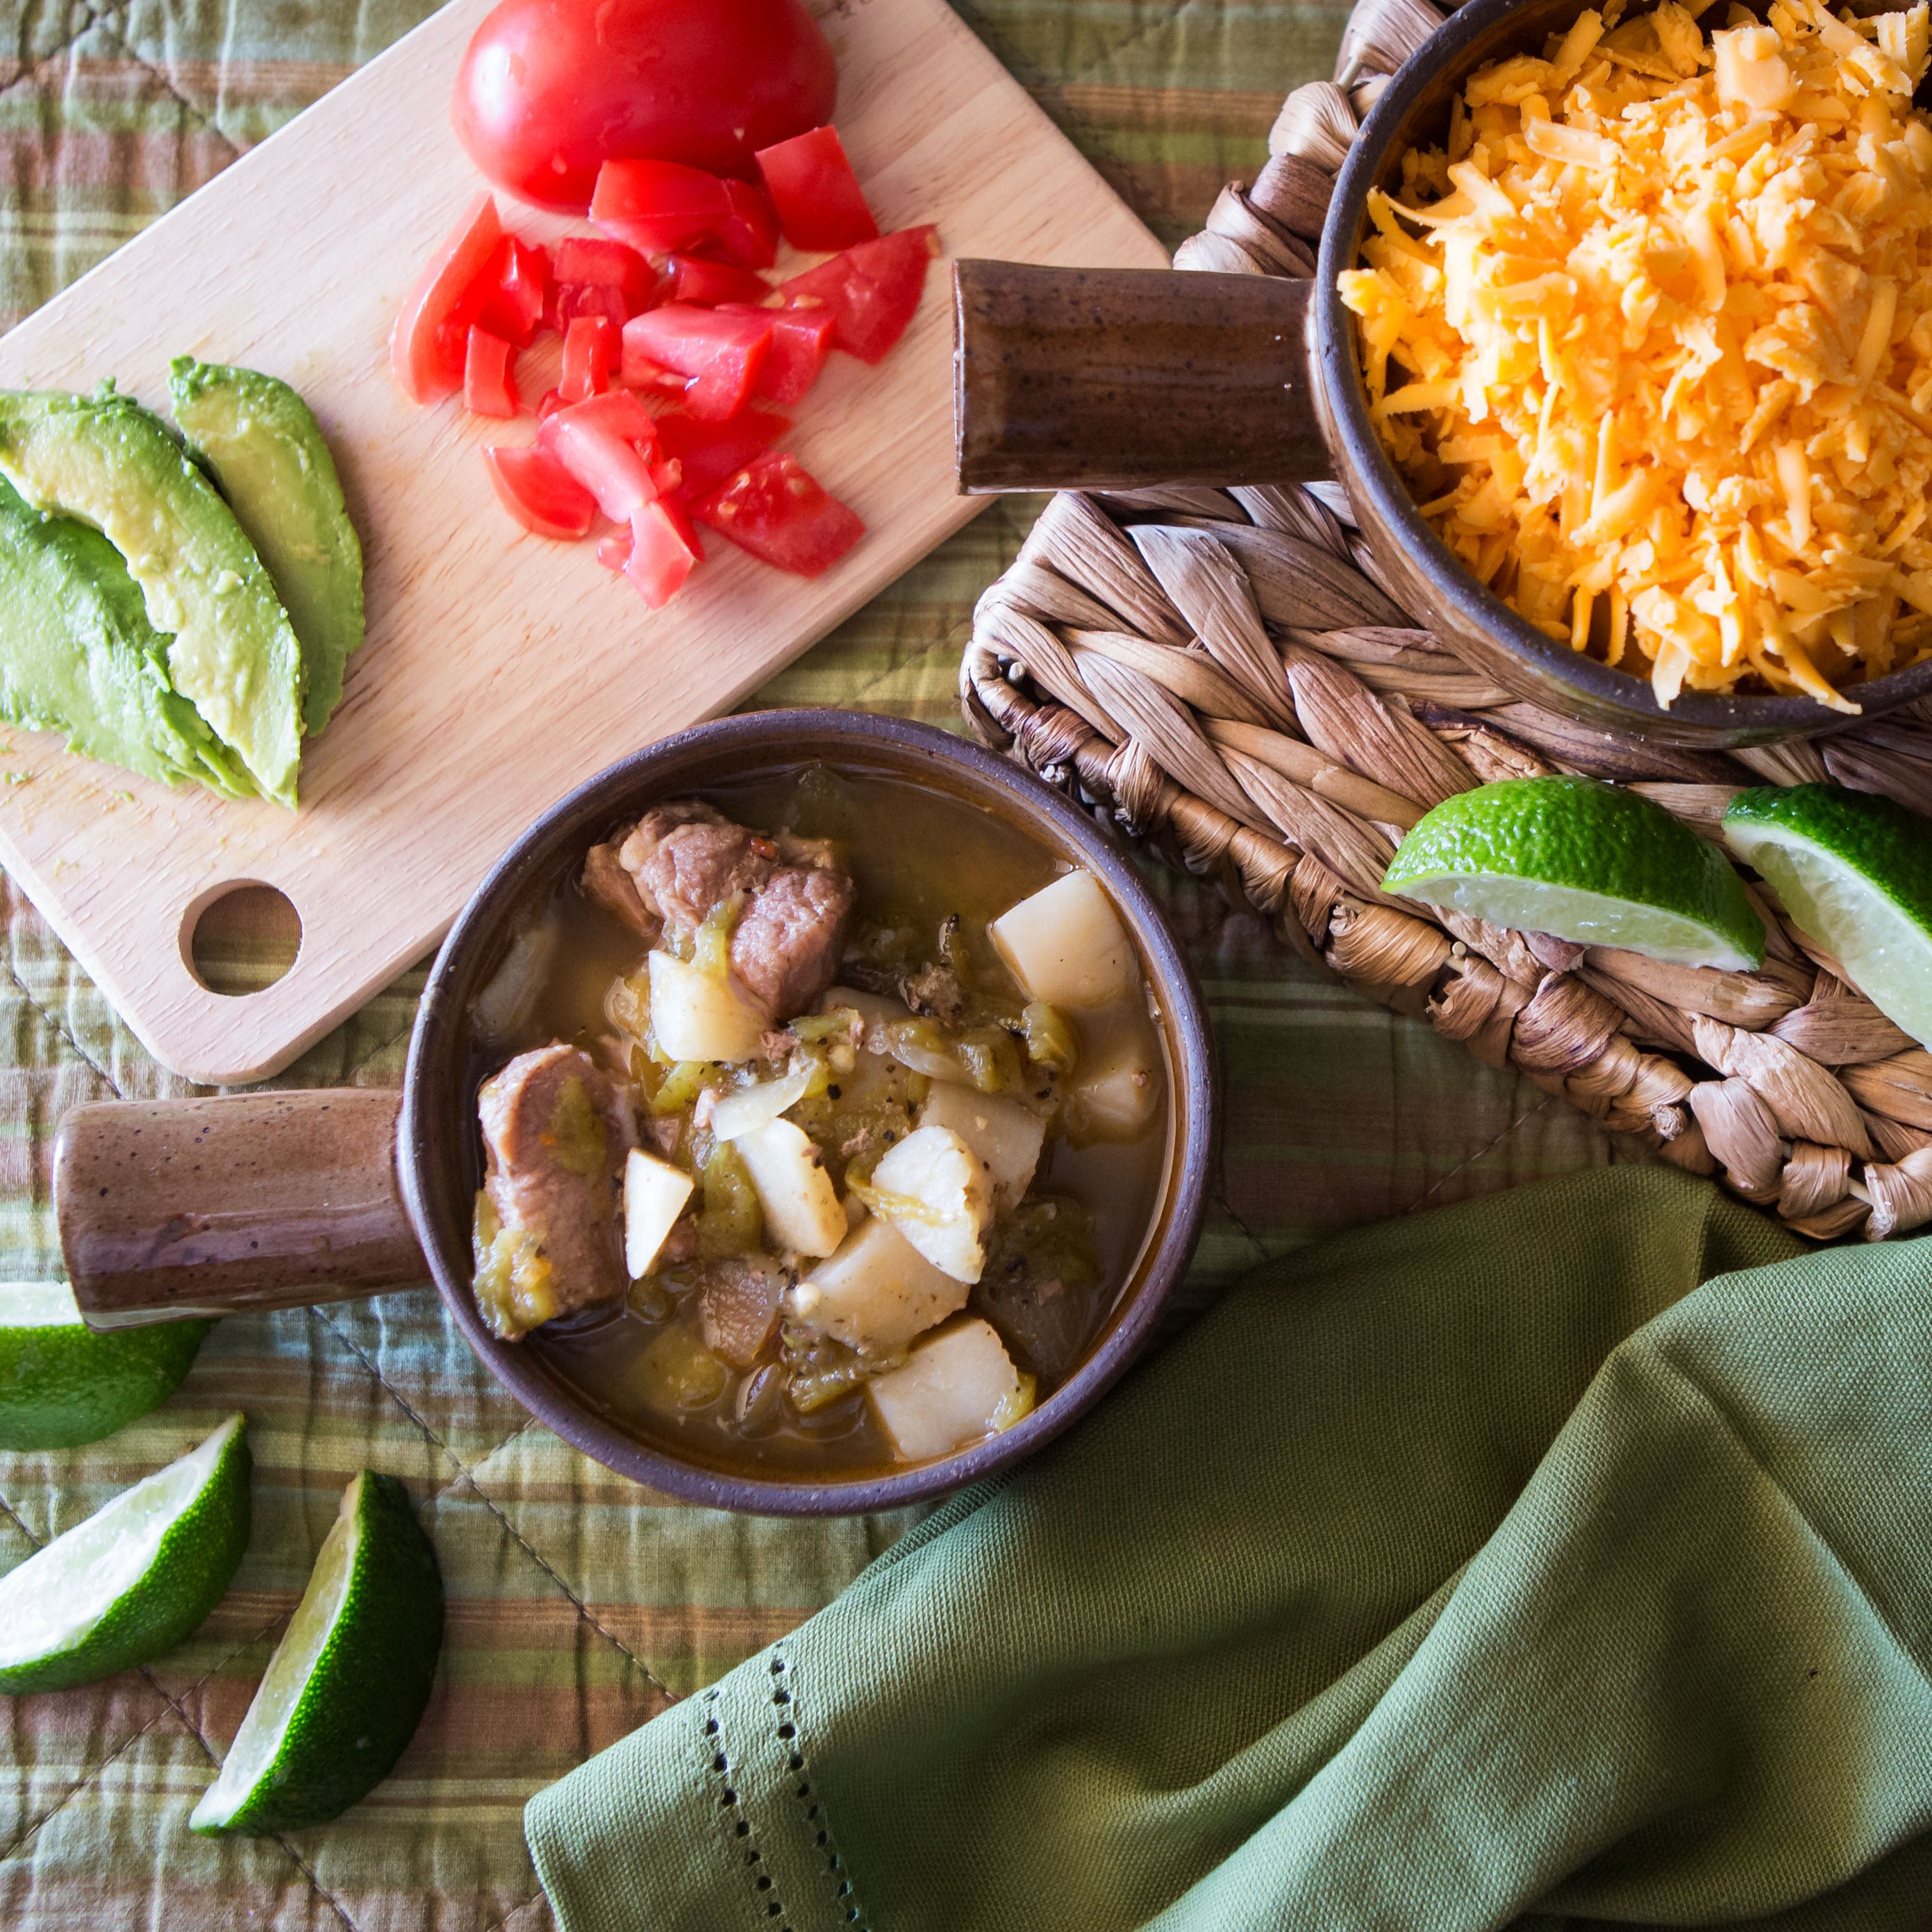 A rustic table setting featuring a bowl of New England Clam Chowder with meat and potatoes, sliced avocado, chopped tomatoes, and shredded cheese, emphasizing a hearty, homemade meal.